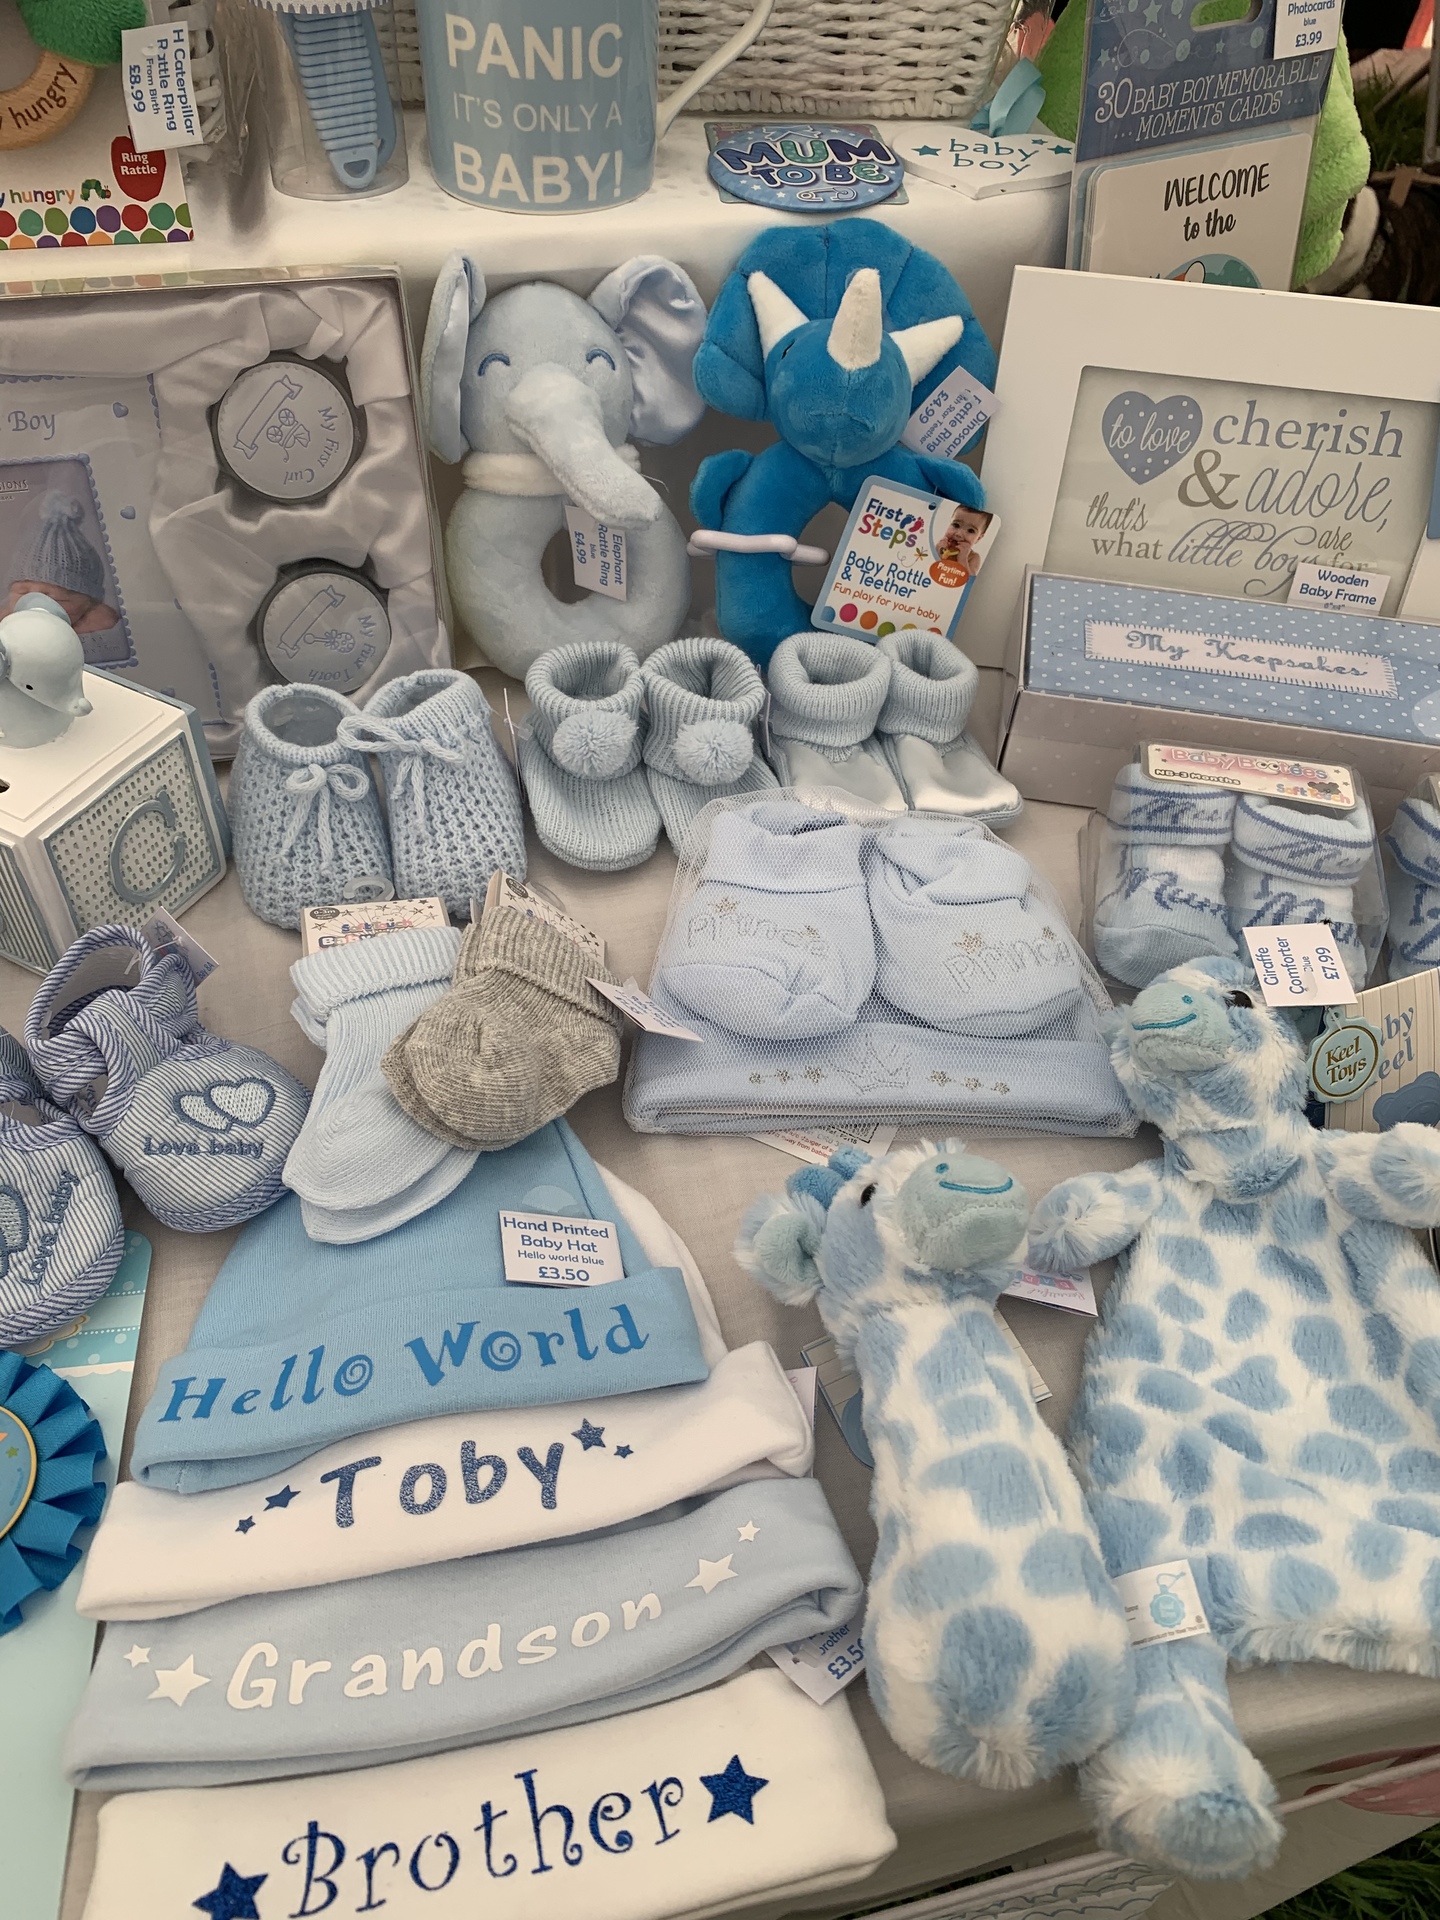 Baby Boy Gifts at The Olde Watermill Barton